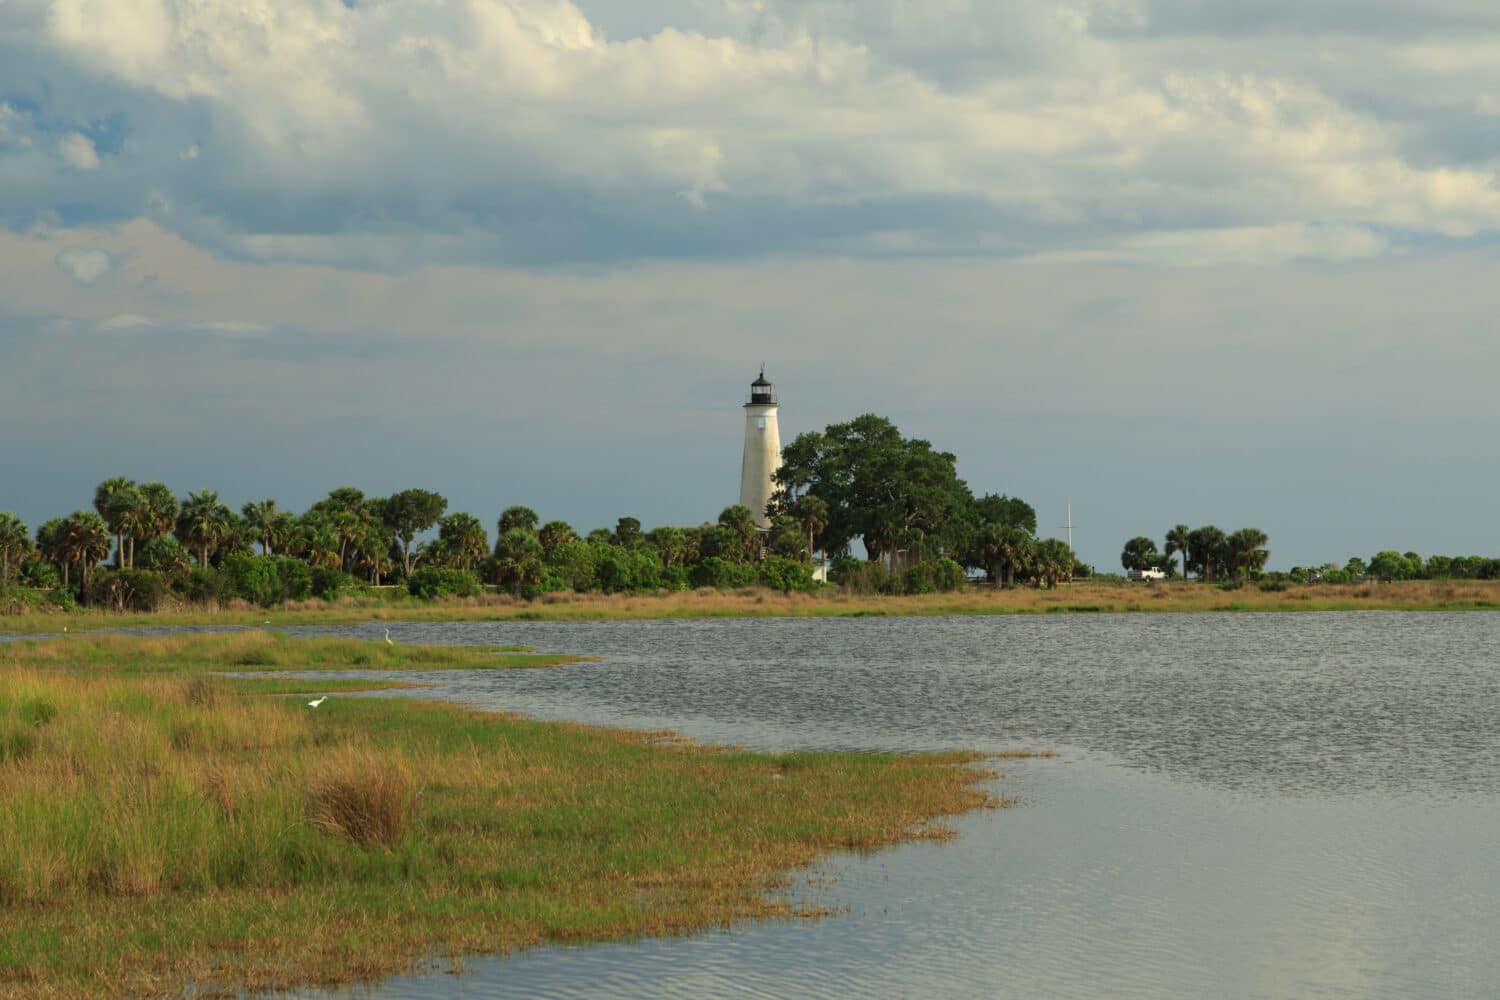 A landscape photograph of St. Marks Lighthouse in the National Wildlife Refuge near Tallahassee in Florida, USA. It is one of the oldest wildlife refuges in the United States.